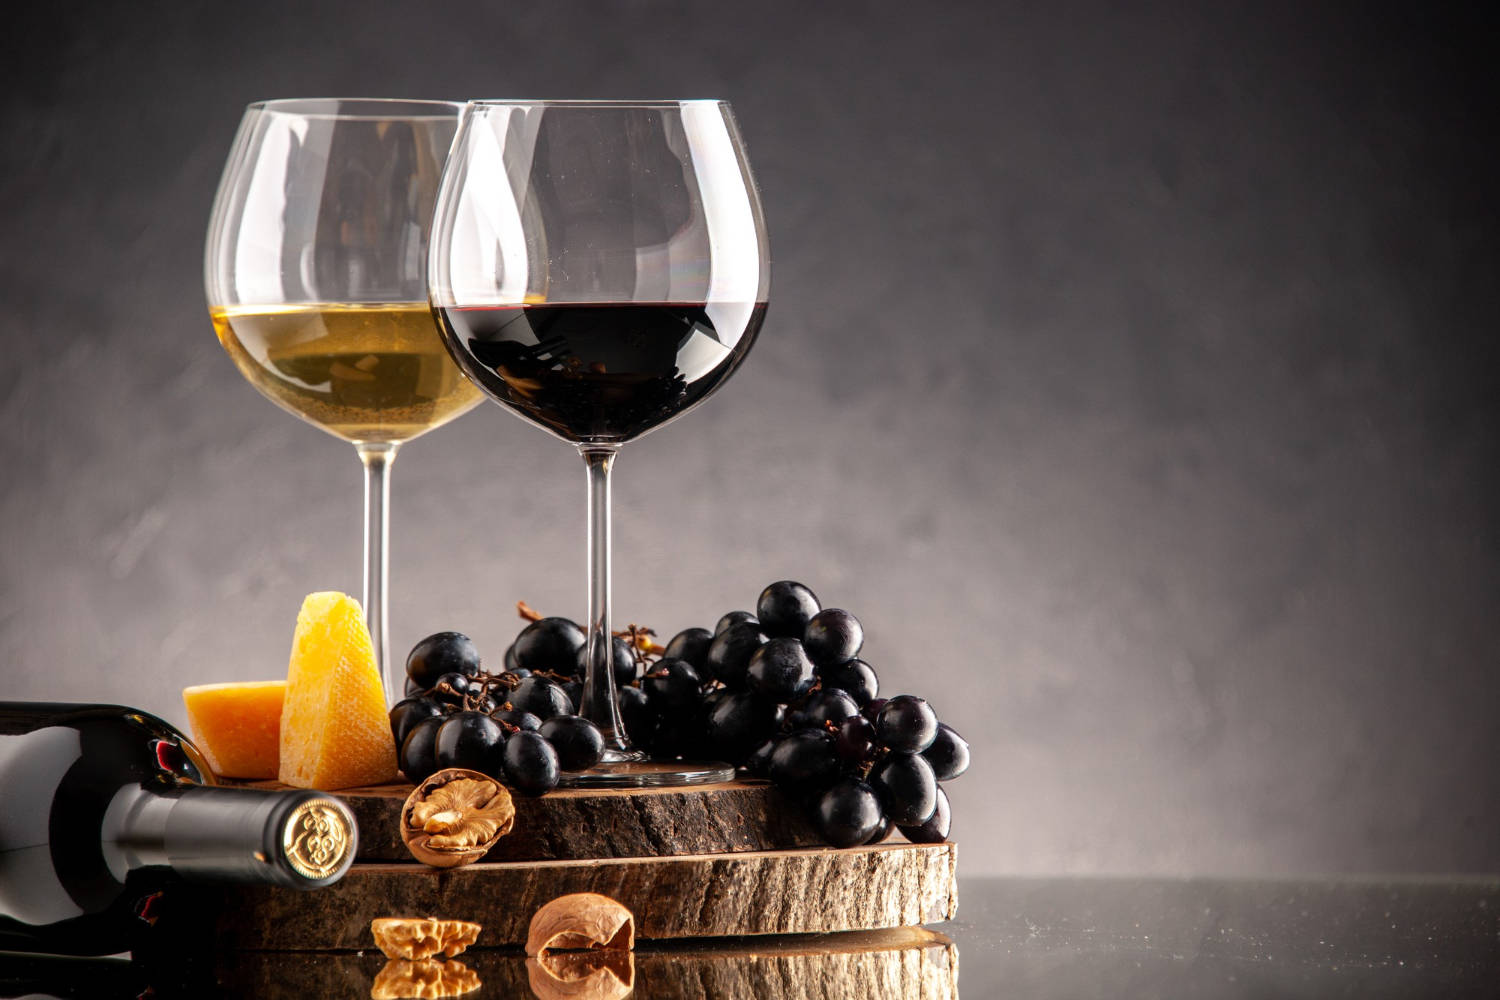 front-view-wine-glasses-fresh-grapes-walnuts-yellow-cheese-wood-board-overturned-bottle-dark-background